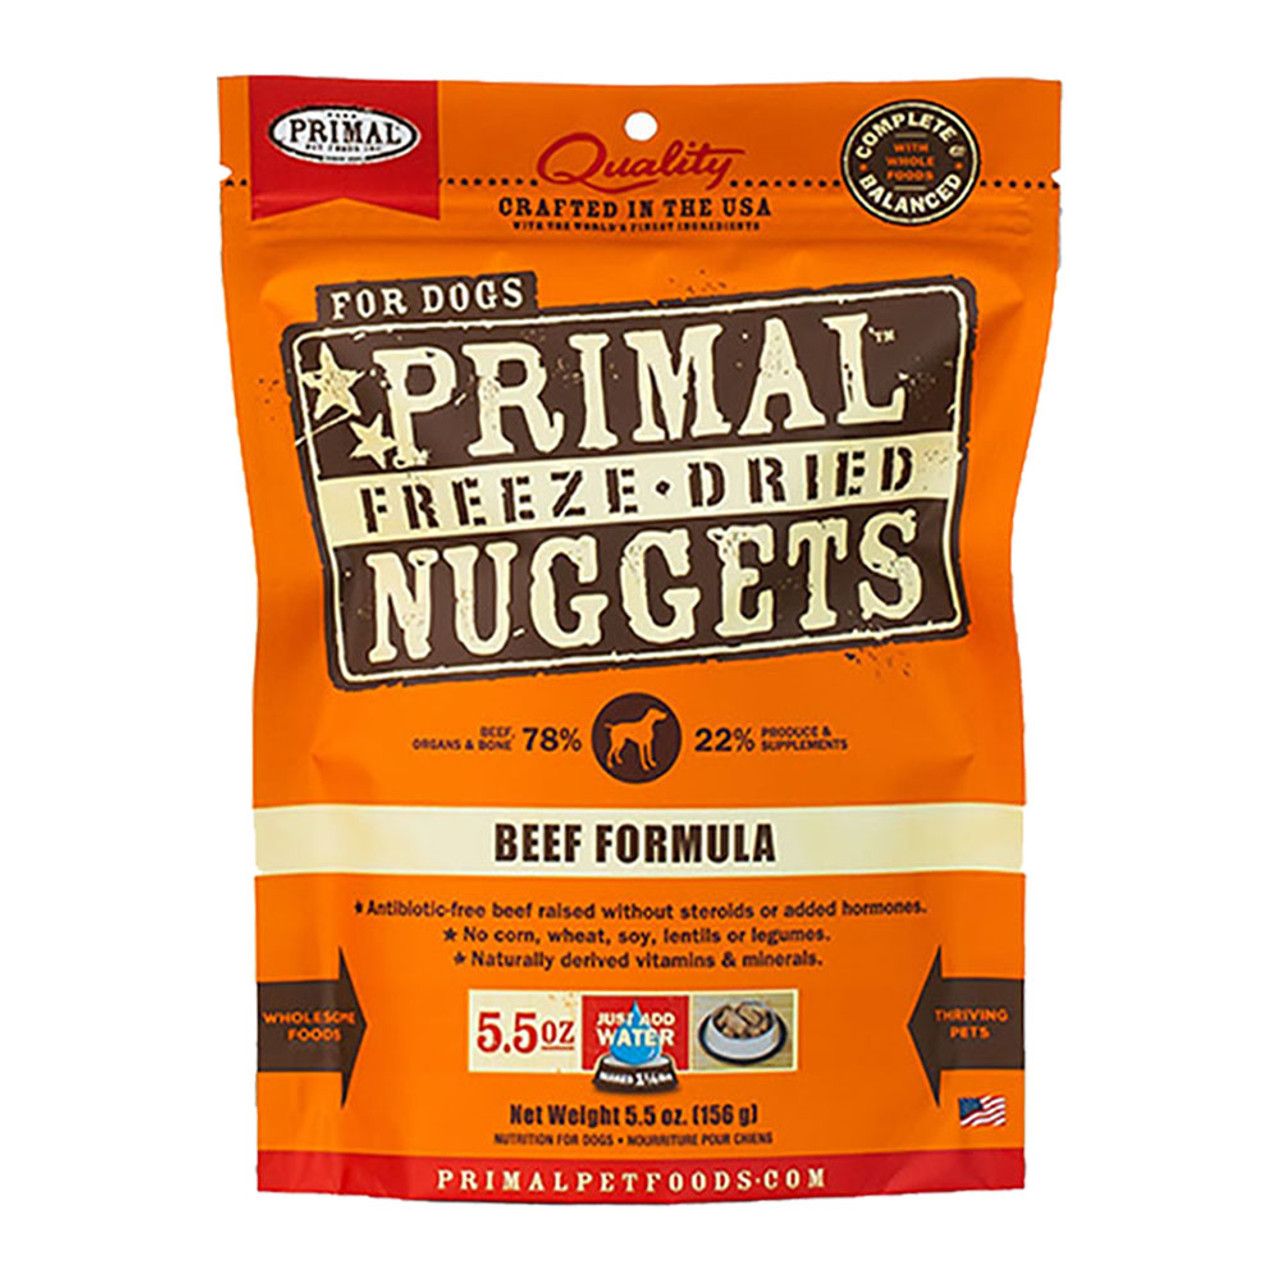 Primal Beef Formula Raw Freeze-Dried Dog Food - Front, Old Packaging